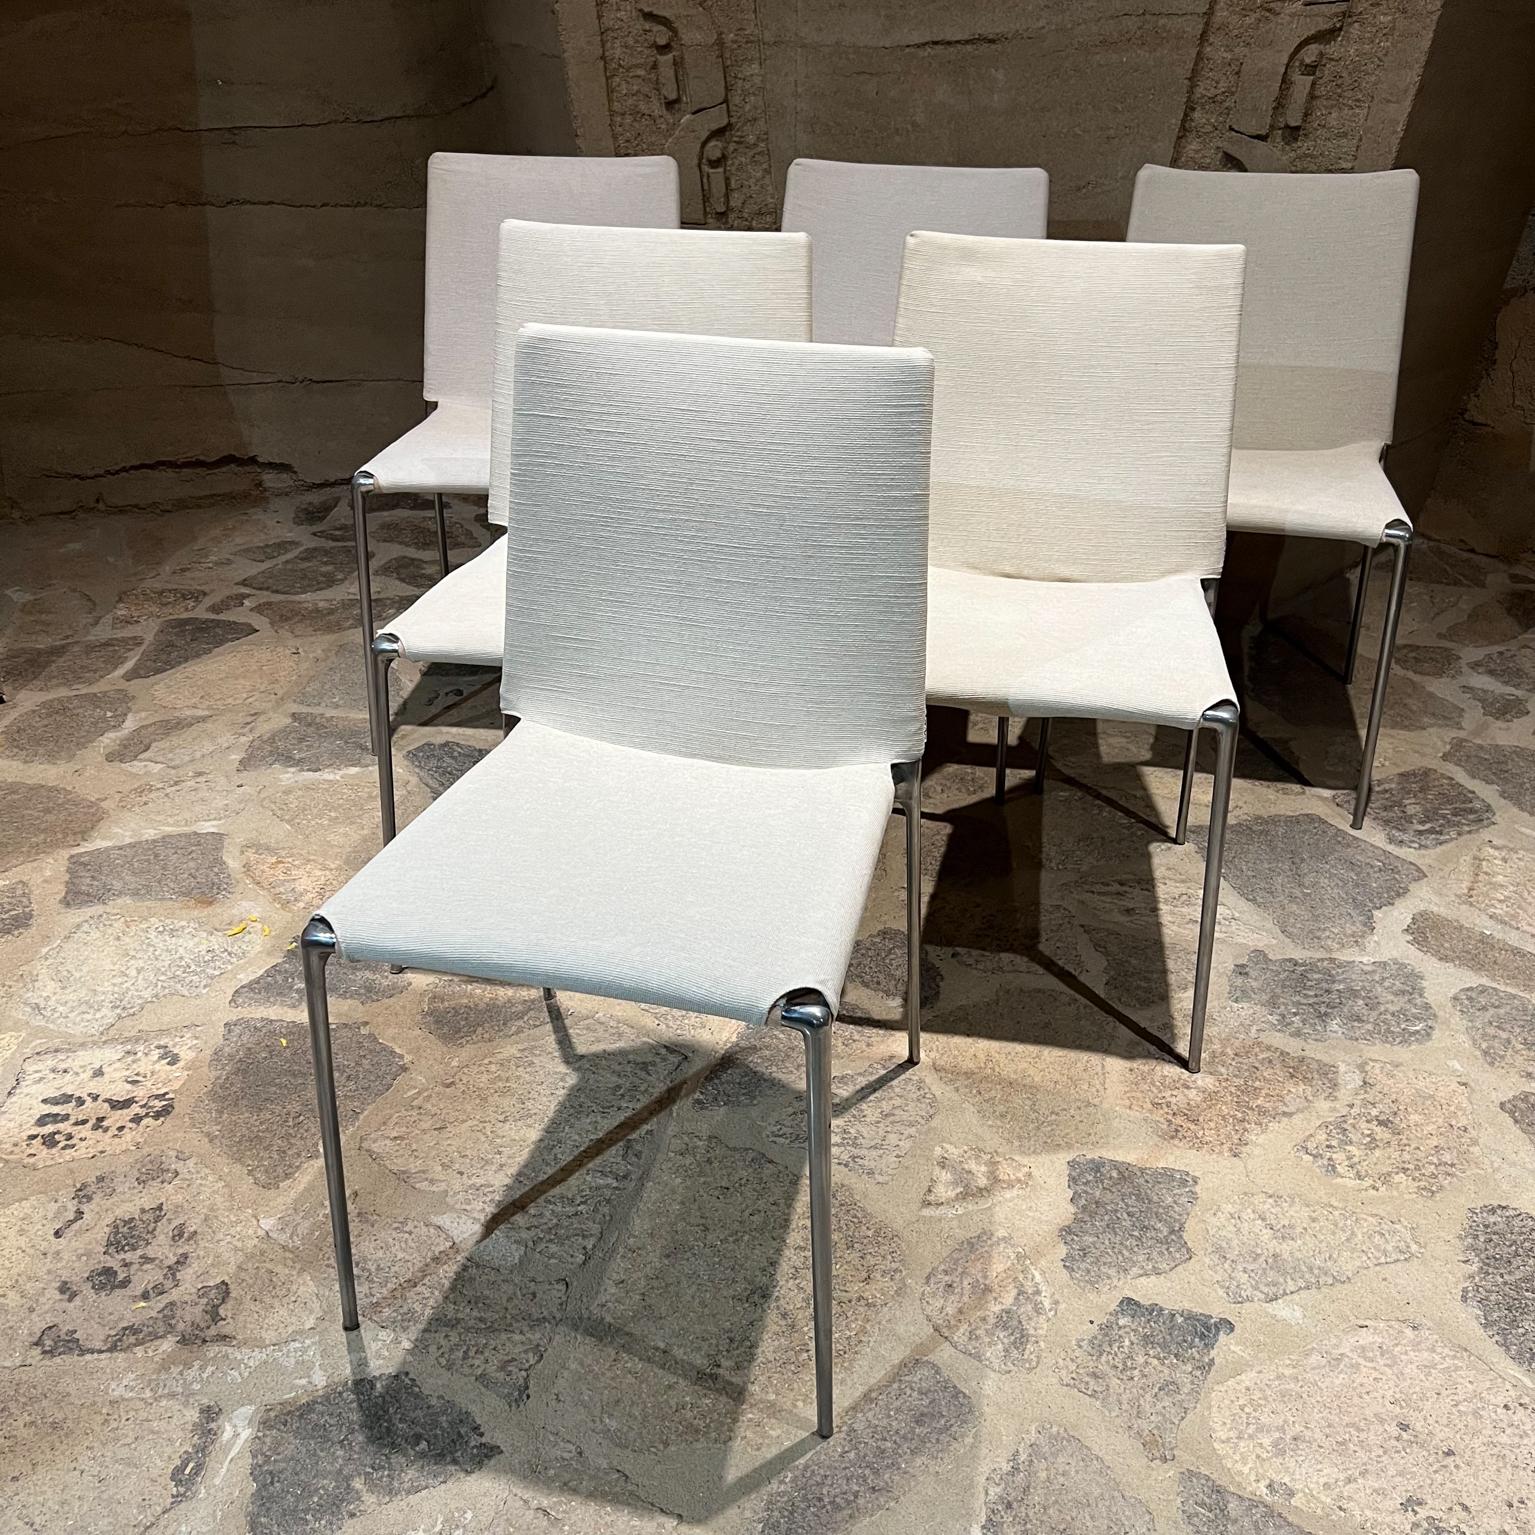 B&B Italia Set of 6 modern ALMA dining chairs White & Chrome 
designed by Roberto Barbieri for B&B Italia.
Stamped Italy. Fabulous feature of being stackable. Modern Flexibility.
32 H x 21D x 18W Seat 18.25H
Chairs retain original label. Built with